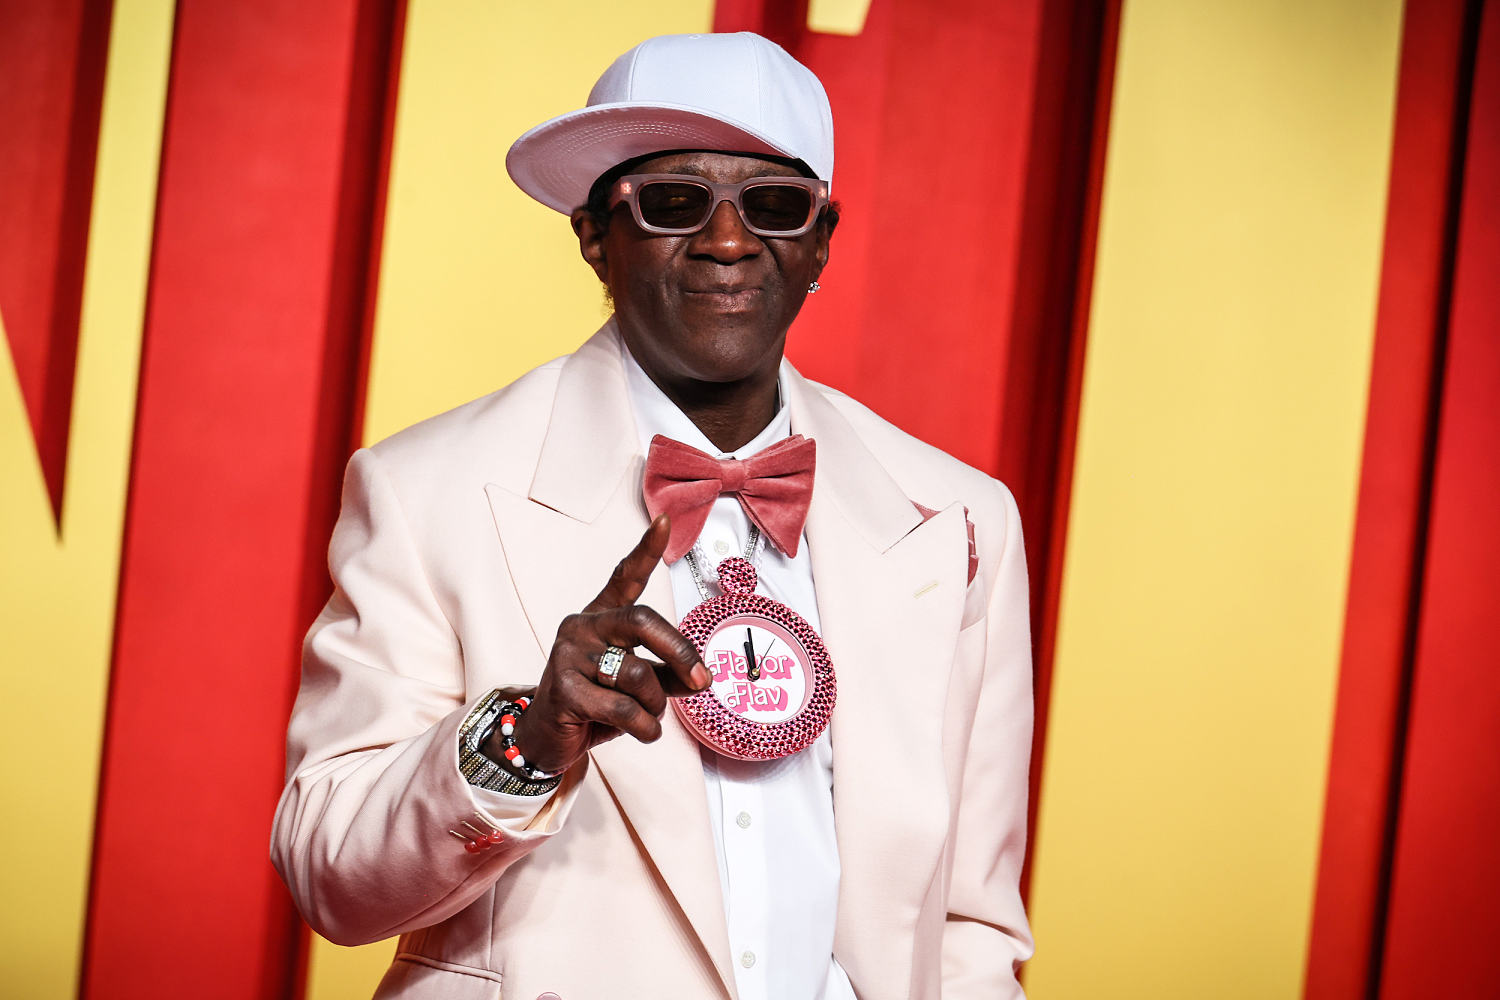 Flavor Flav is the official hype man for the U.S. women’s water polo team in the Paris Olympics